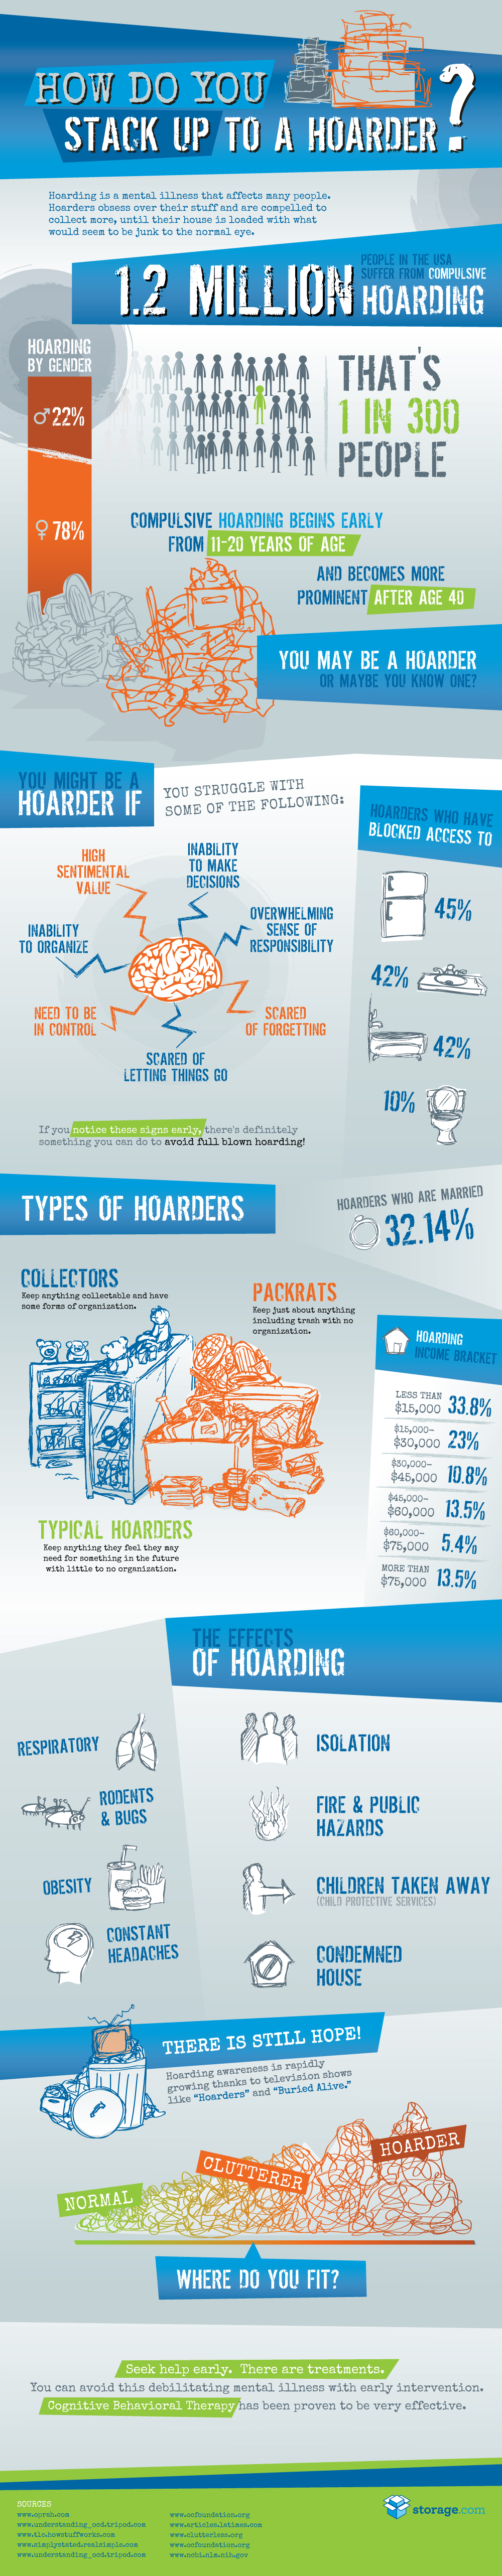 How Do You Stack Up to a Hoarder?